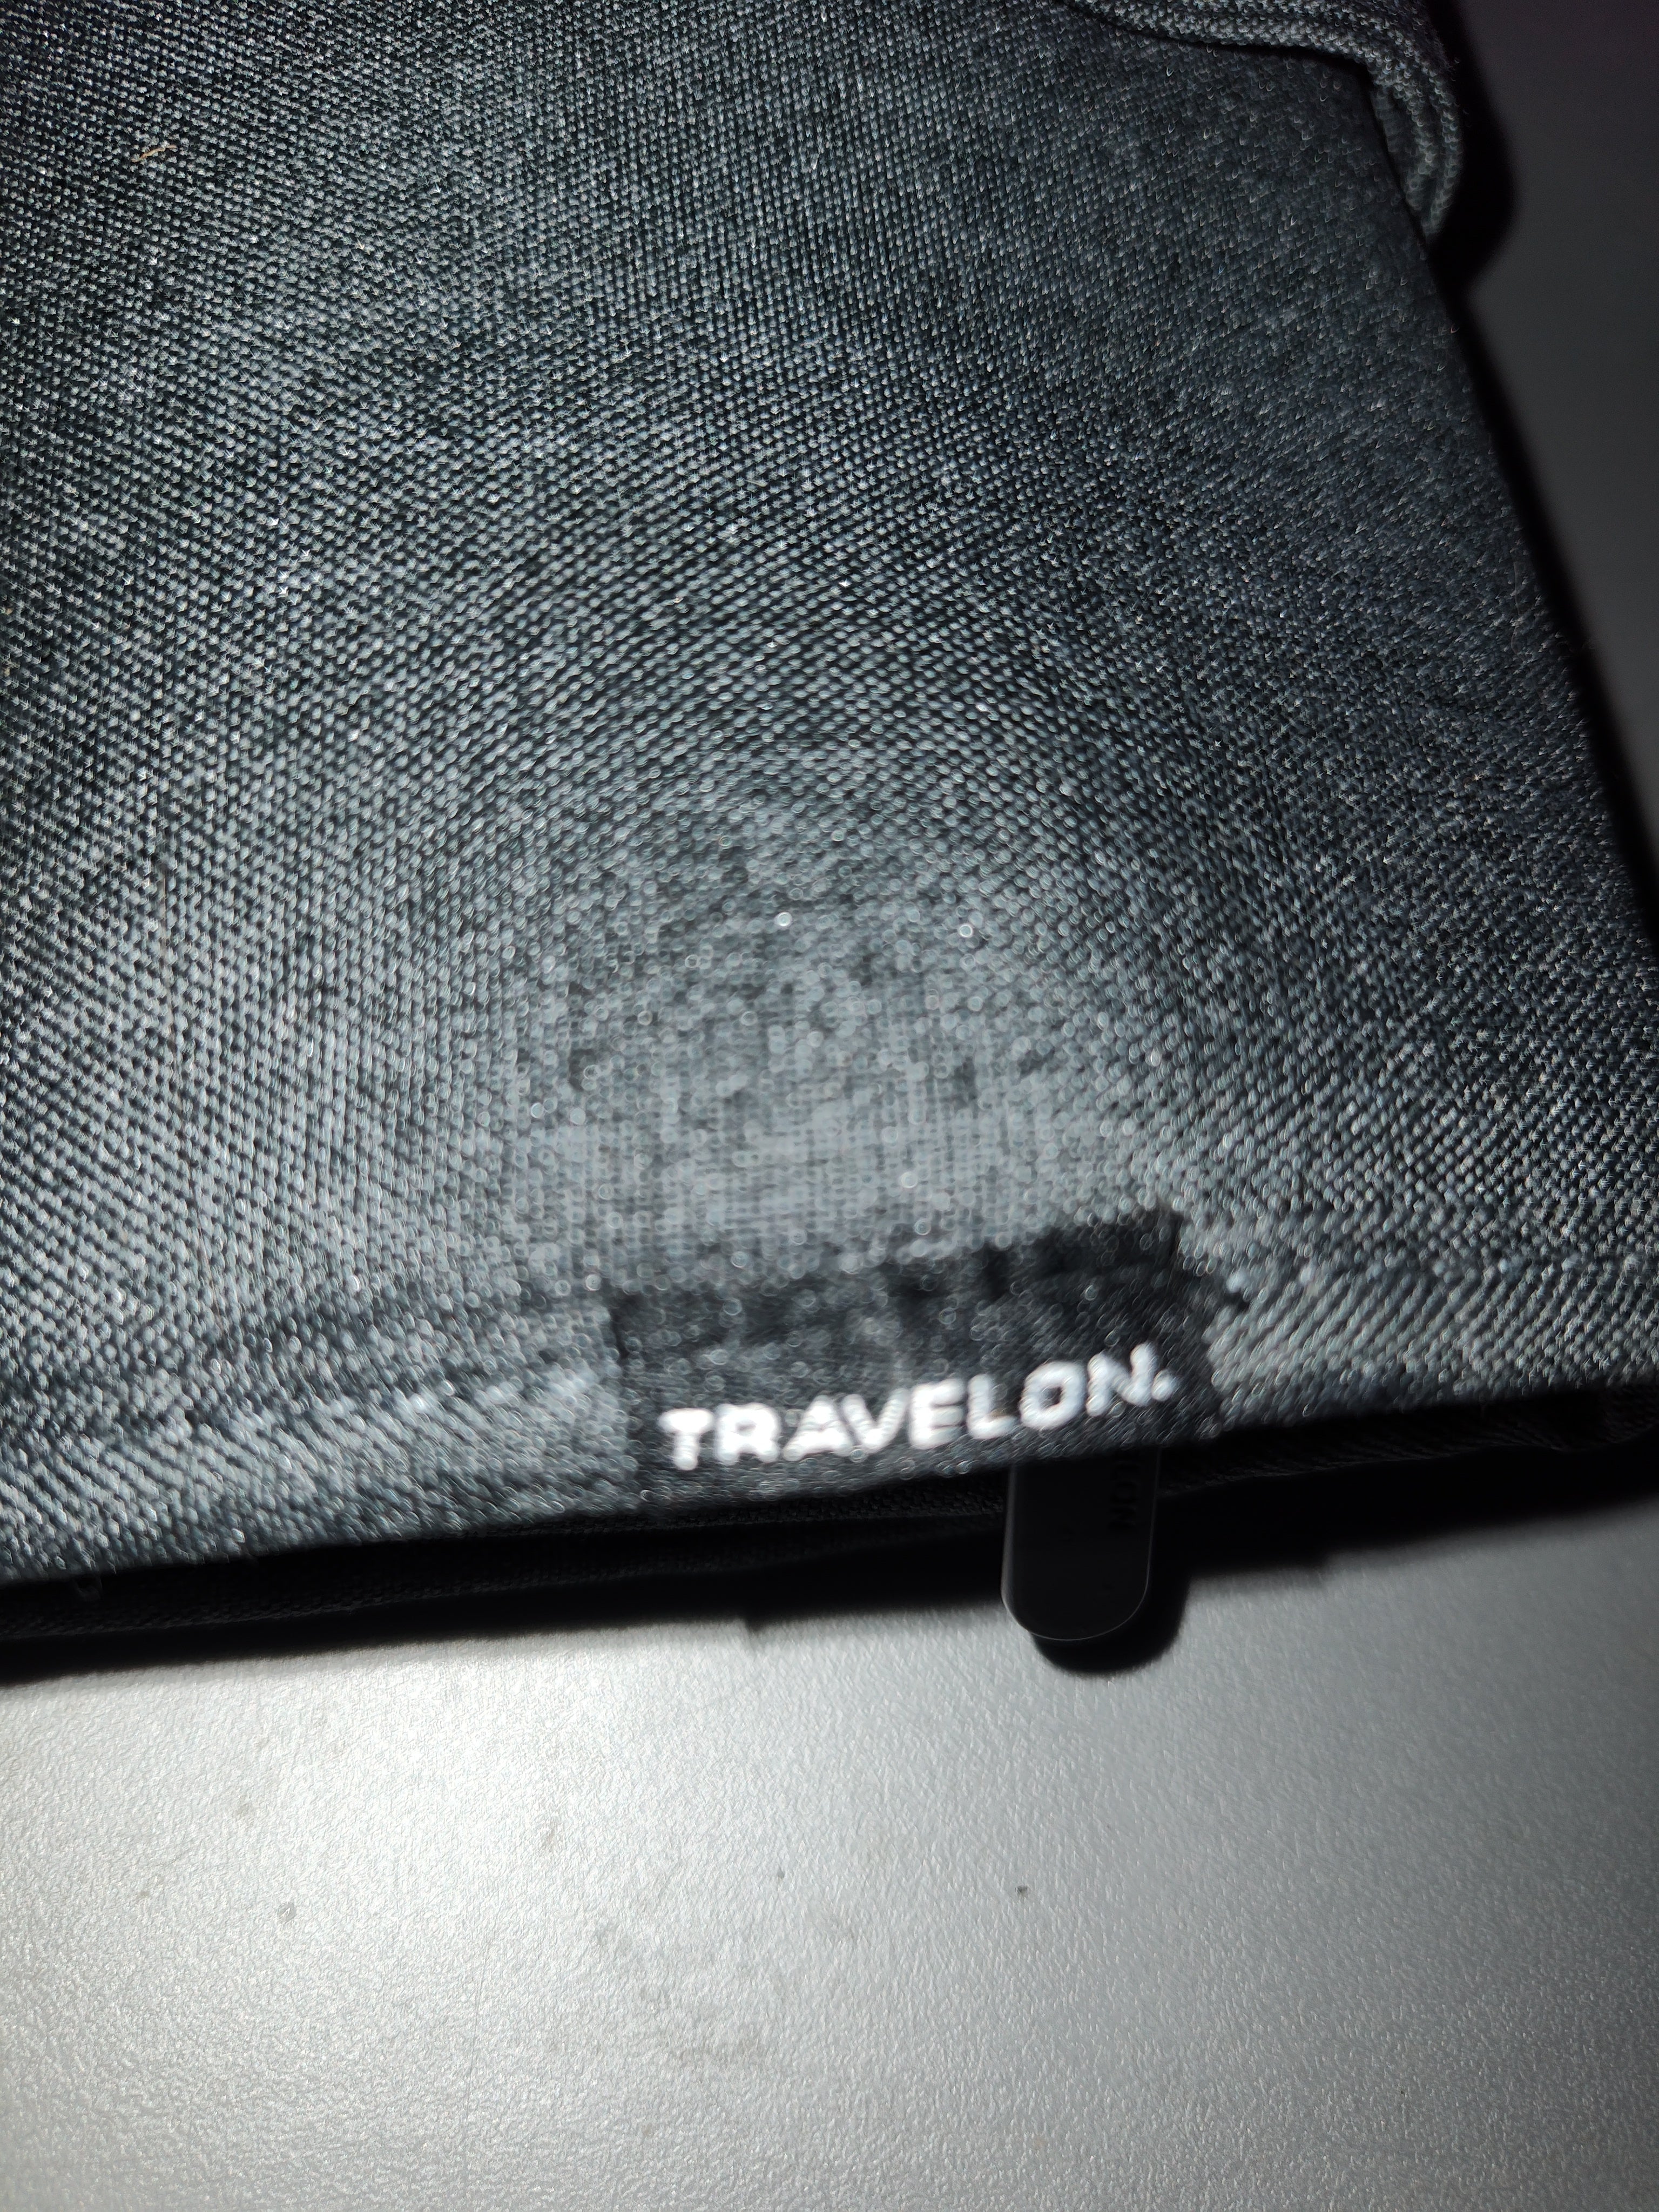 Travelon Black Roll-up Travel Wallet - new without tags